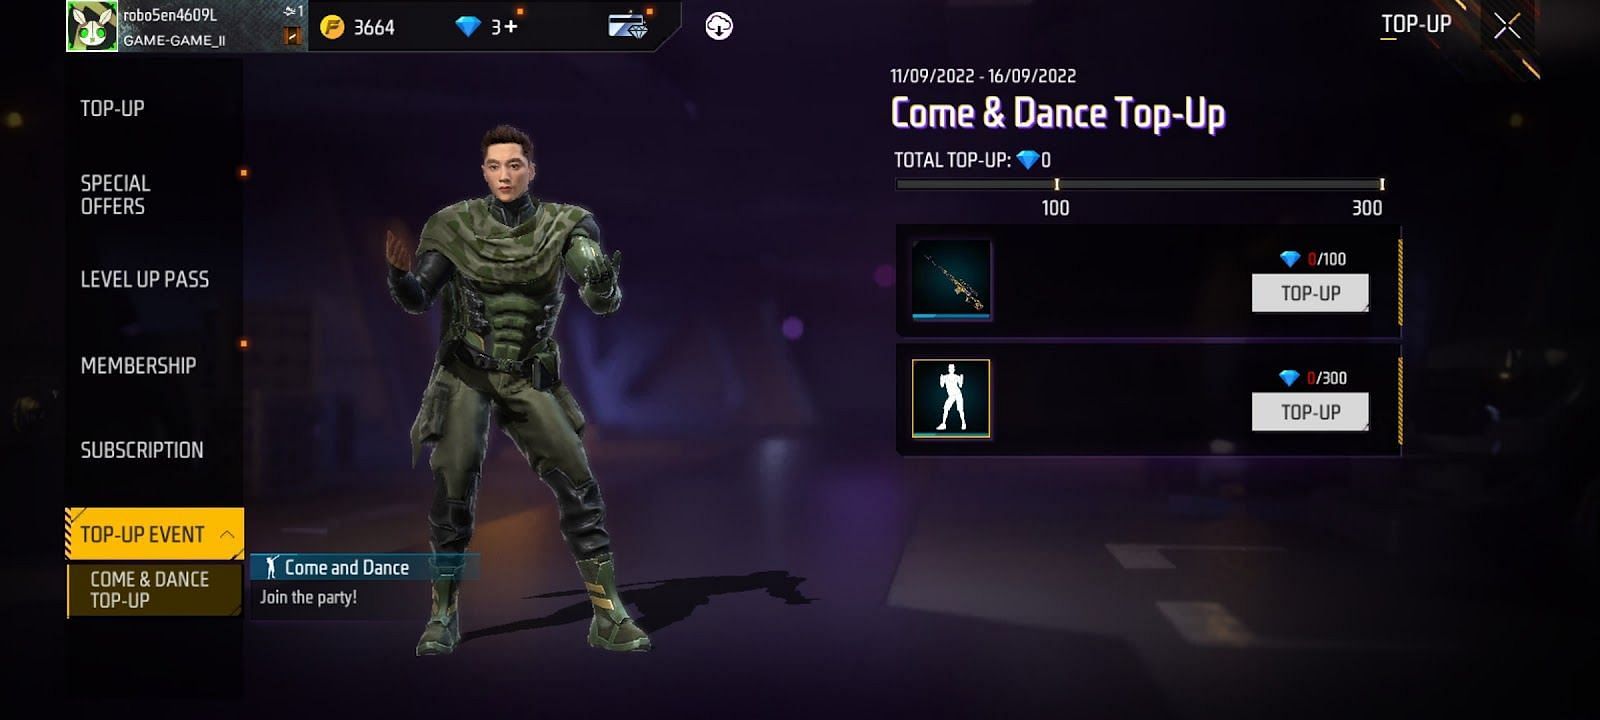 How to get both rewards in Come &amp; Dance Top-Up event (Image via Garena)